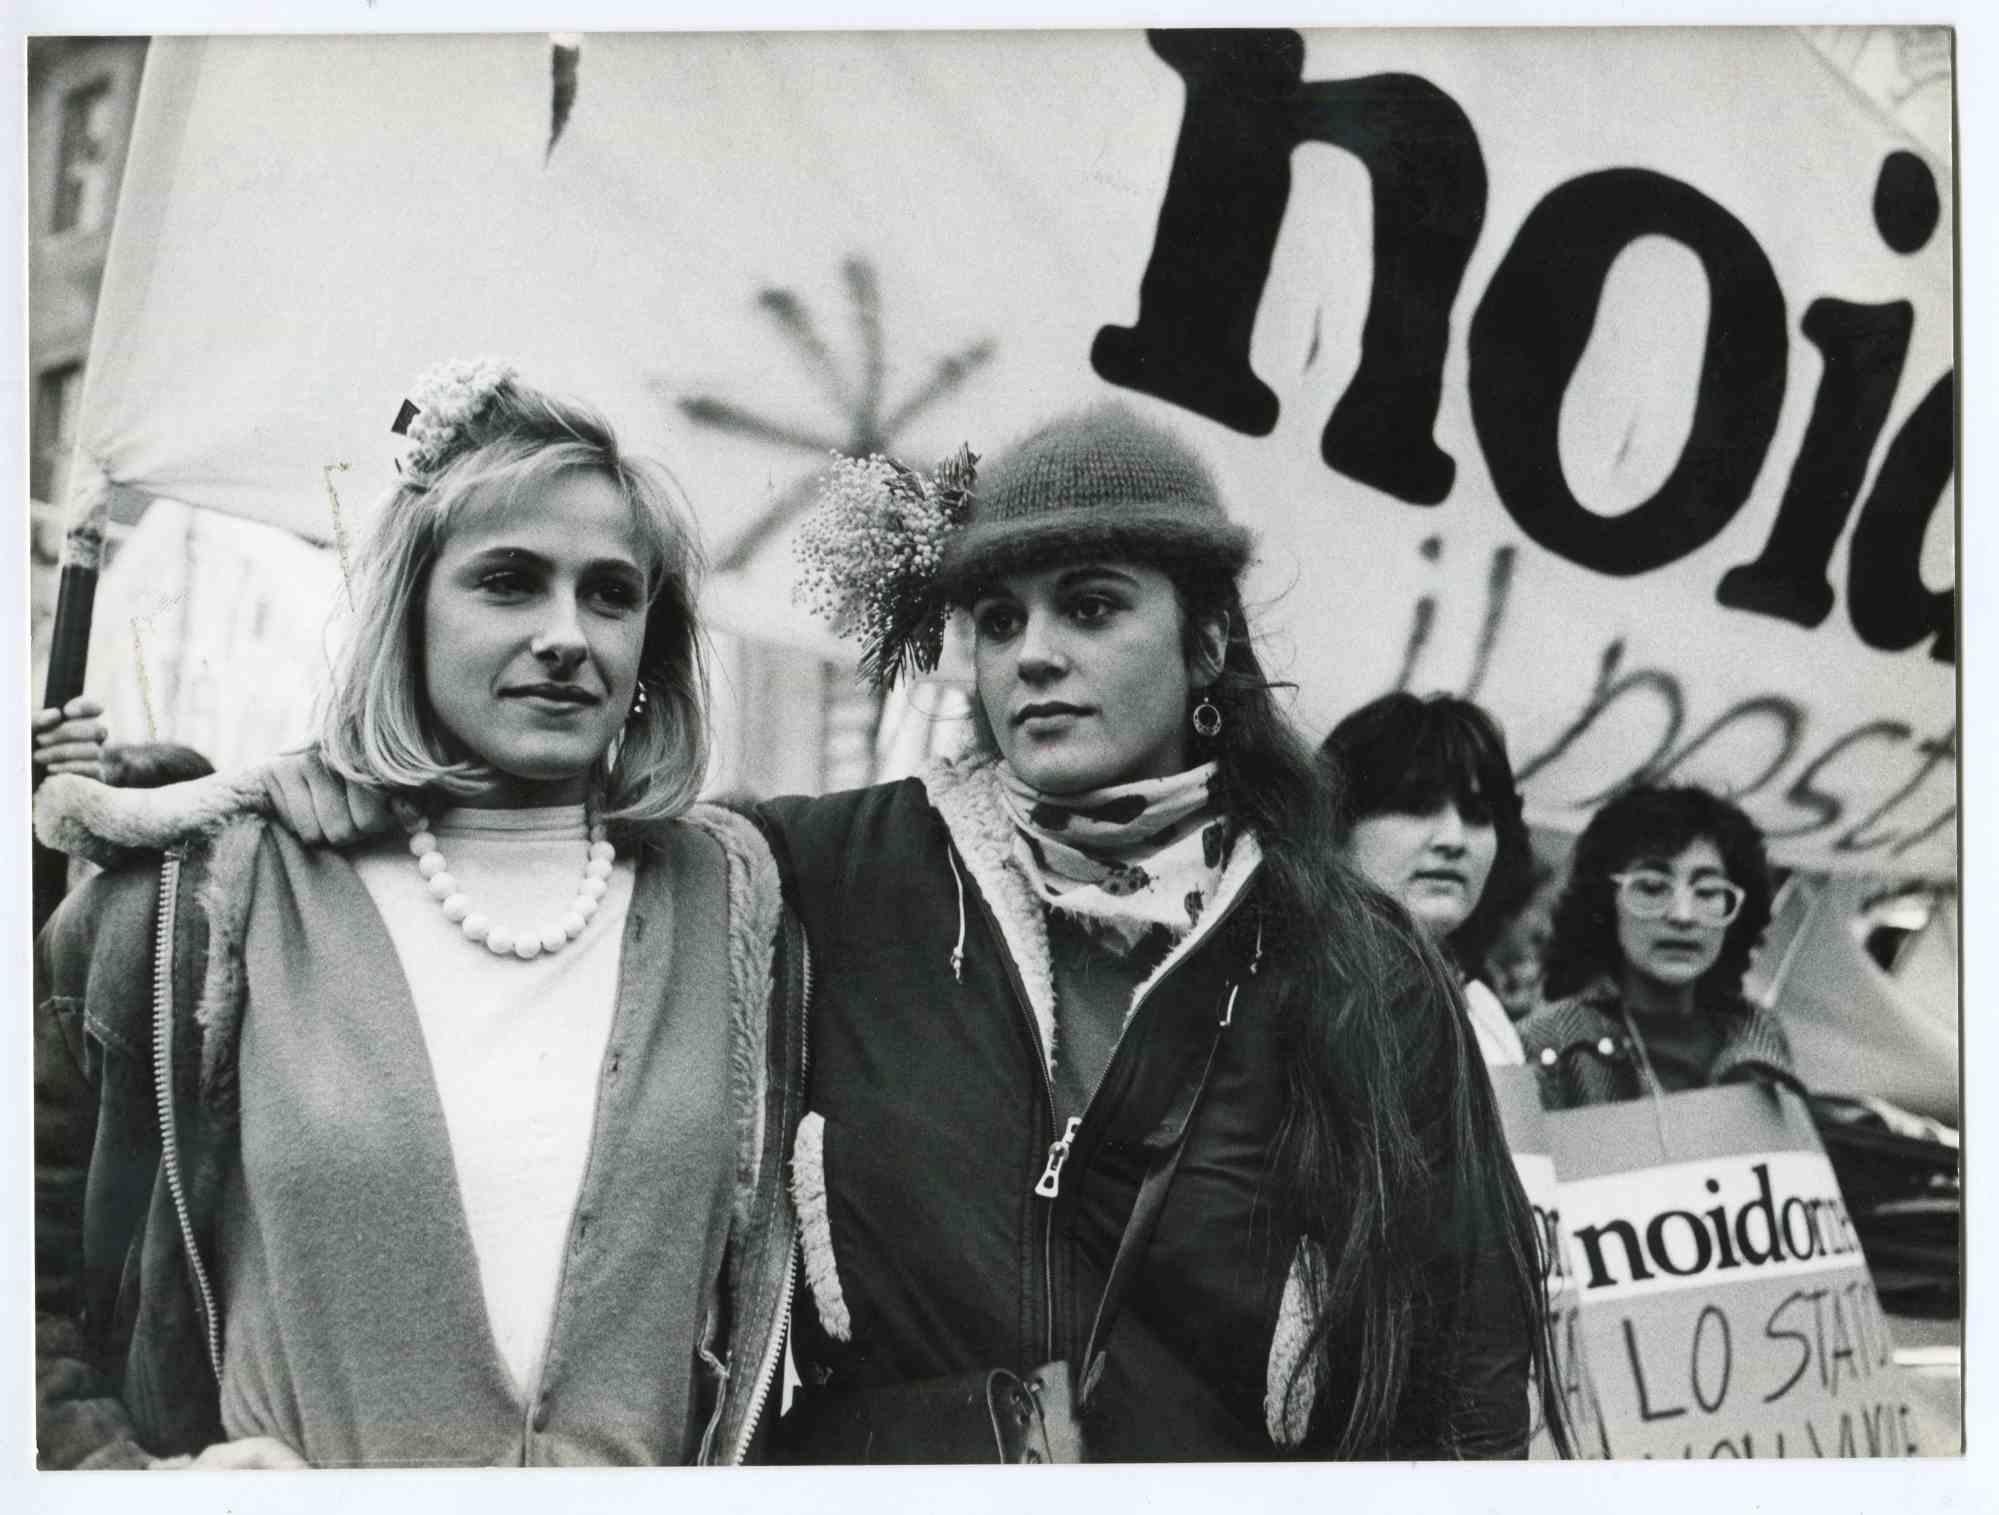 Unknown Black and White Photograph - The Protest - Historical Photograph About the Feminist Movement - 1970s